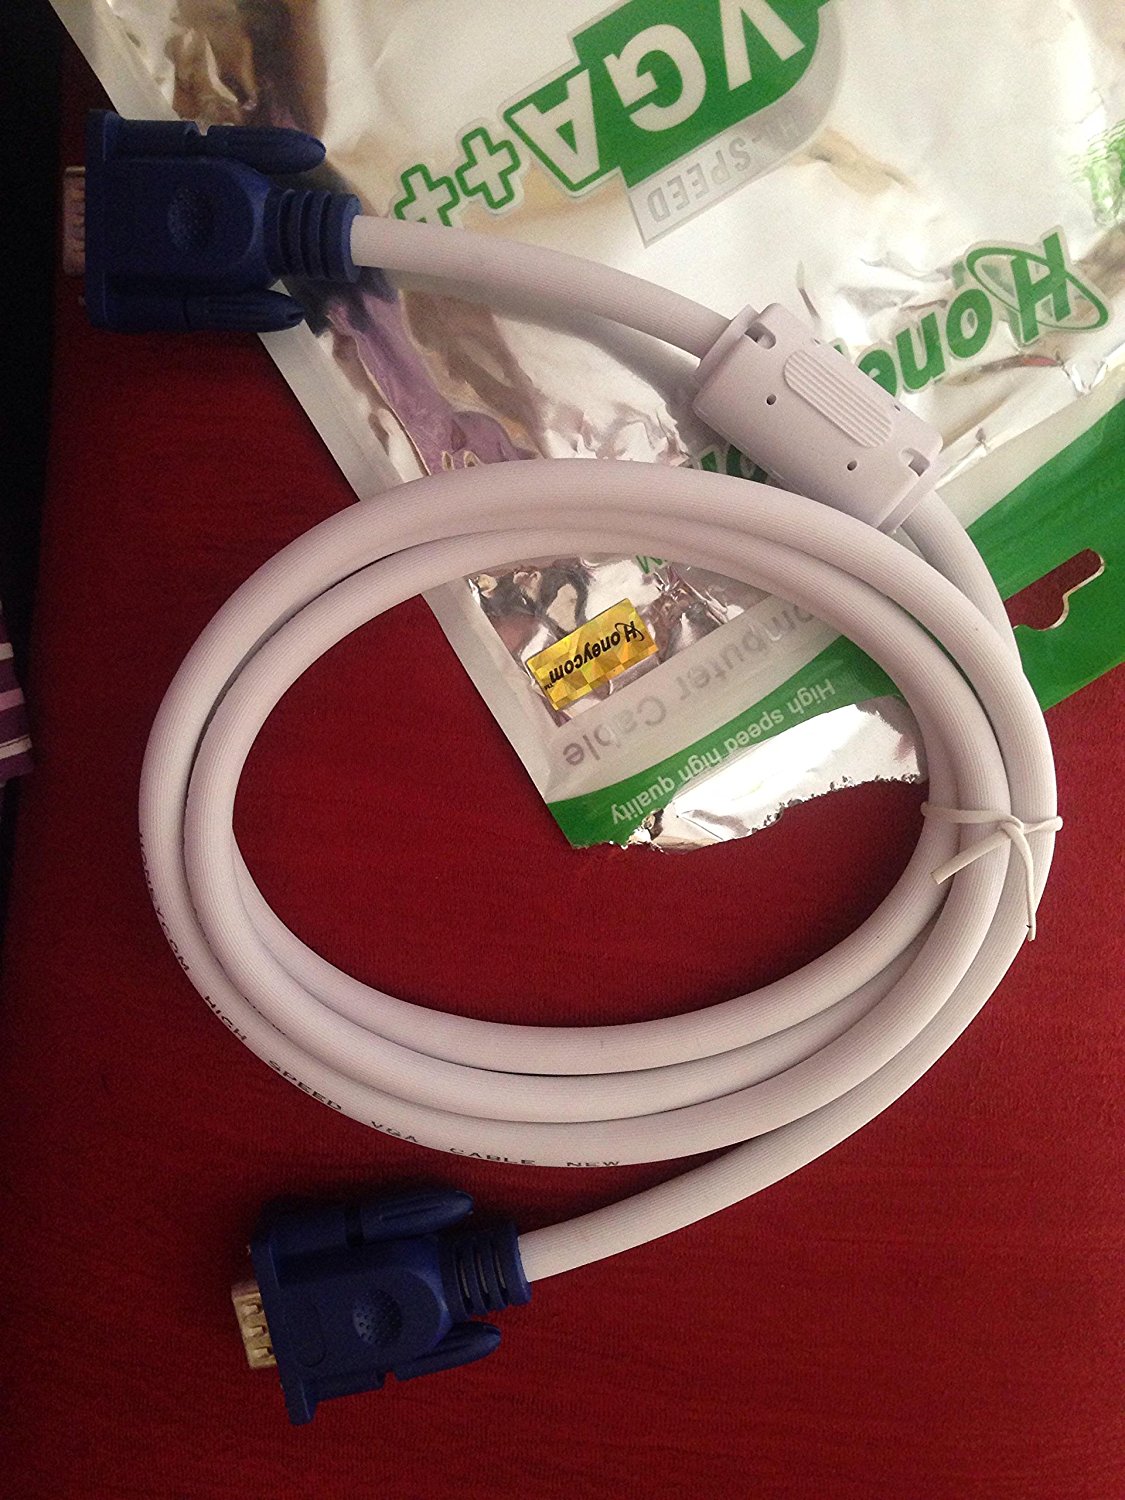 HIGH QUALITY VGA CABLE 3 METER